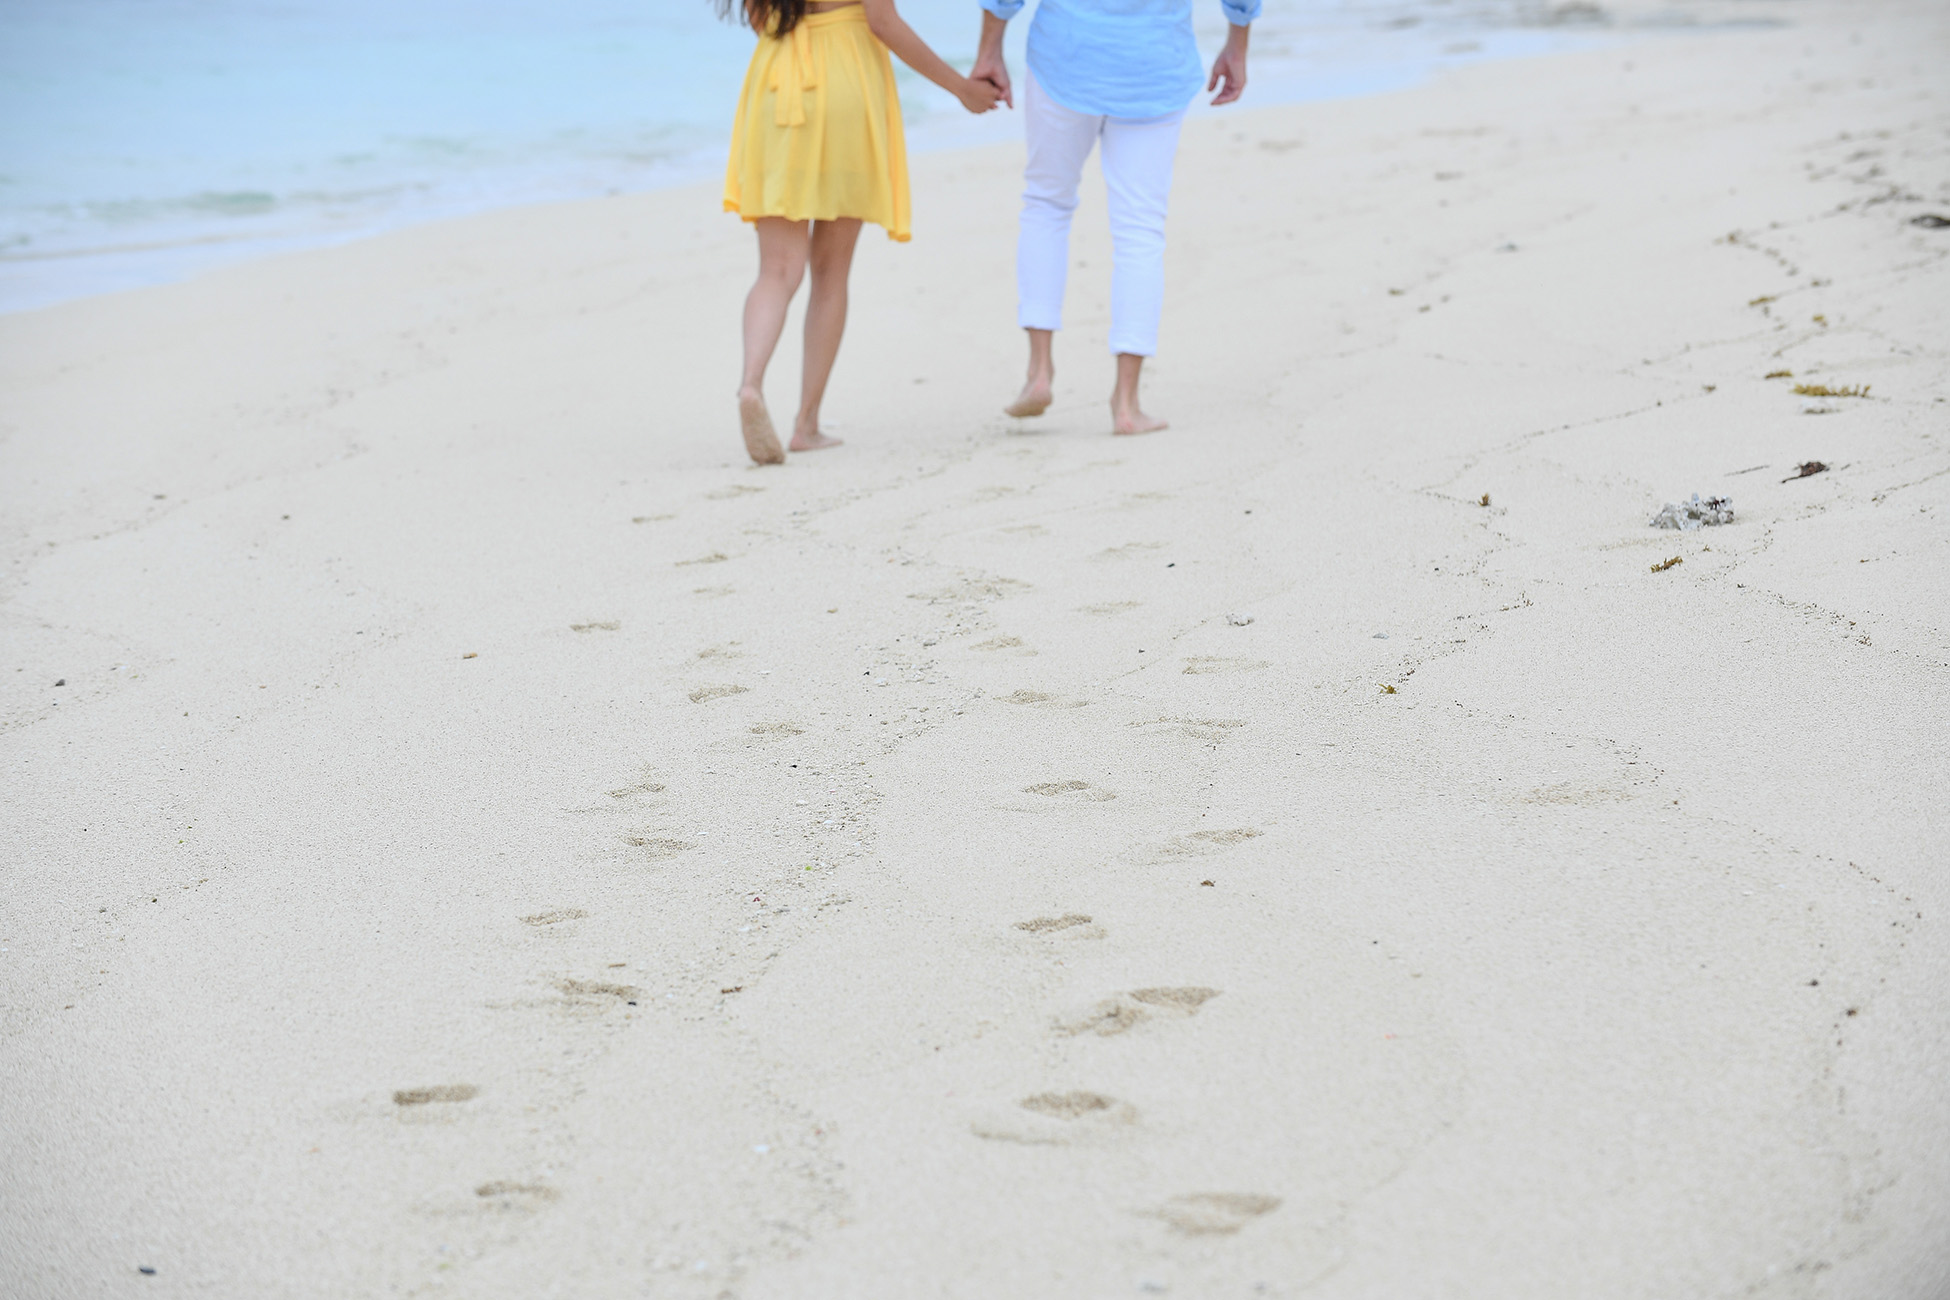 The newly engaged couple leave footprints on the beige Mamanunca beach of Fiji